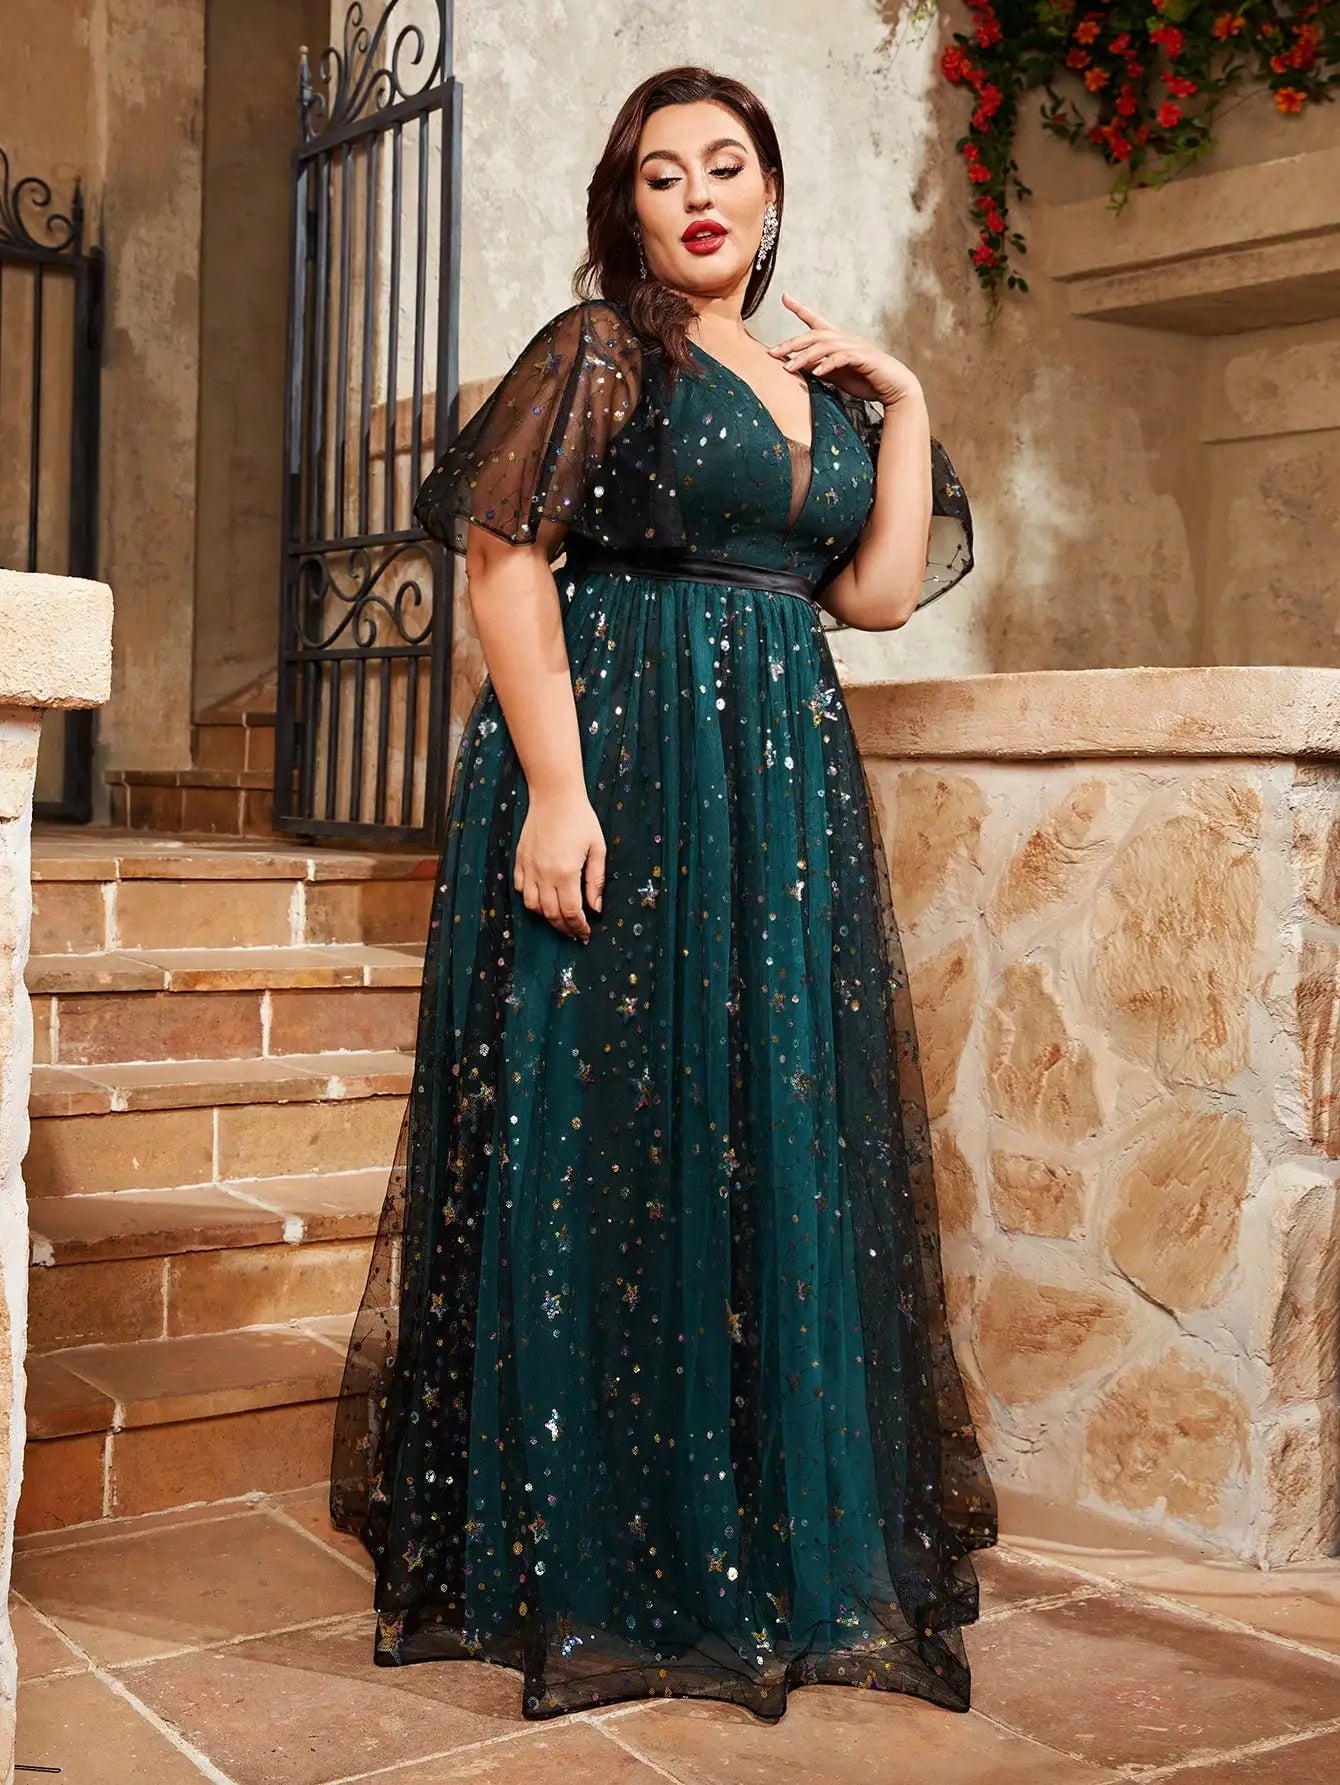 Mgiacy plus size V-neck sequin embroidered contrasting double mesh full skirt Evening gown Ball dress Party dress